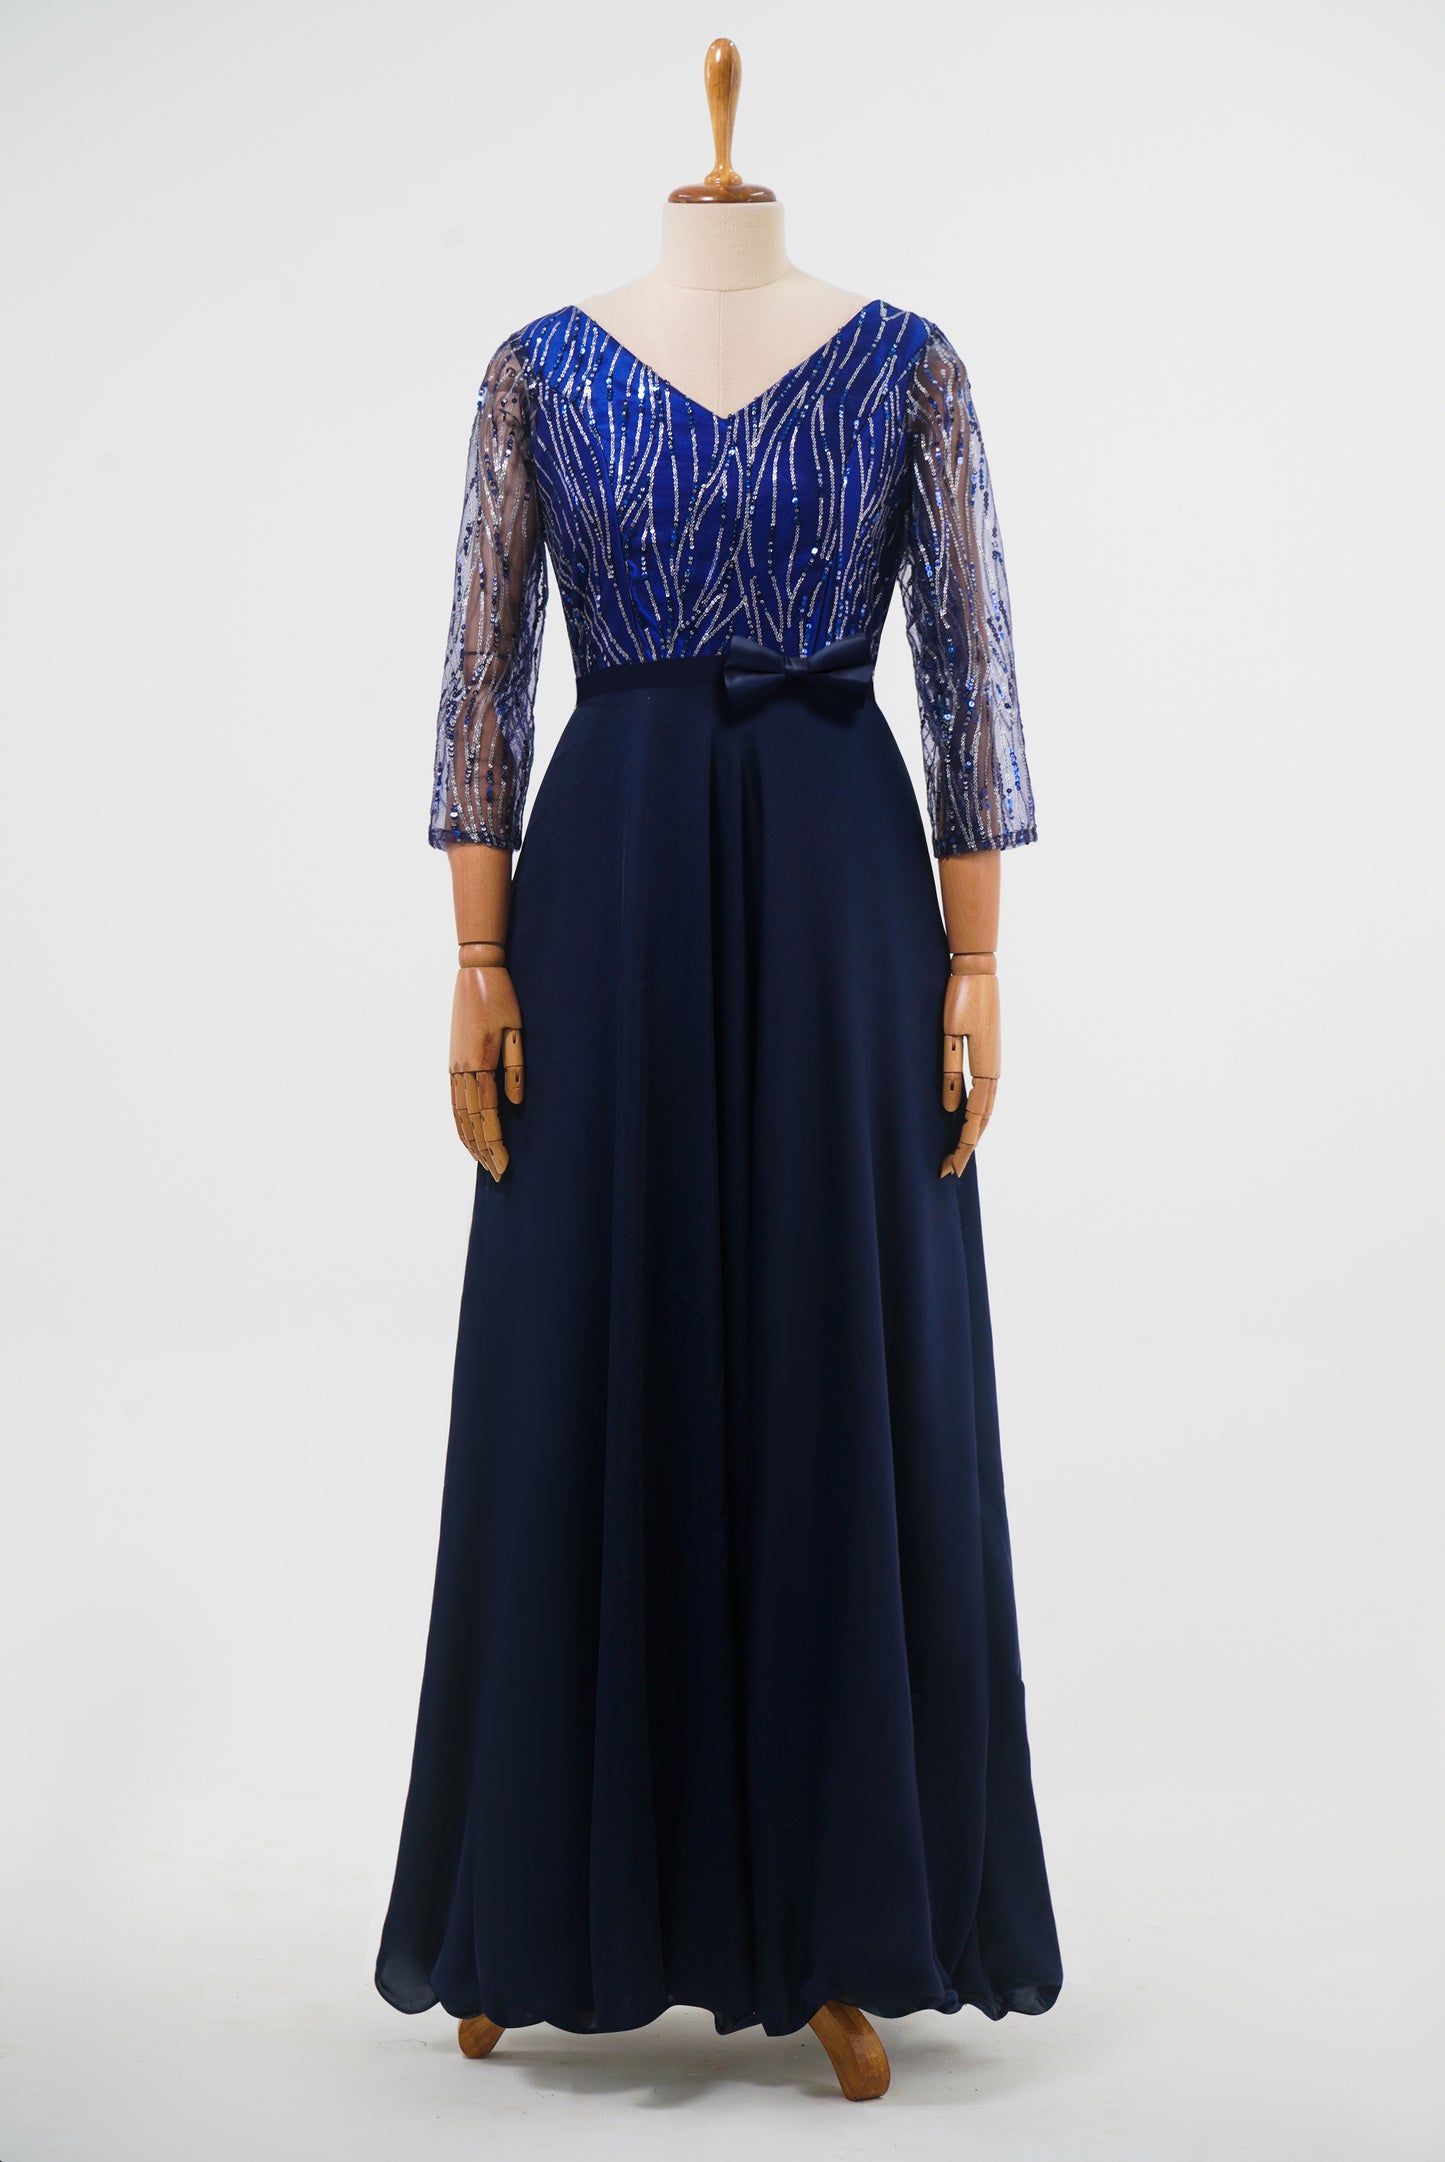 ZIA256 Blue Netted Gown with V neck.